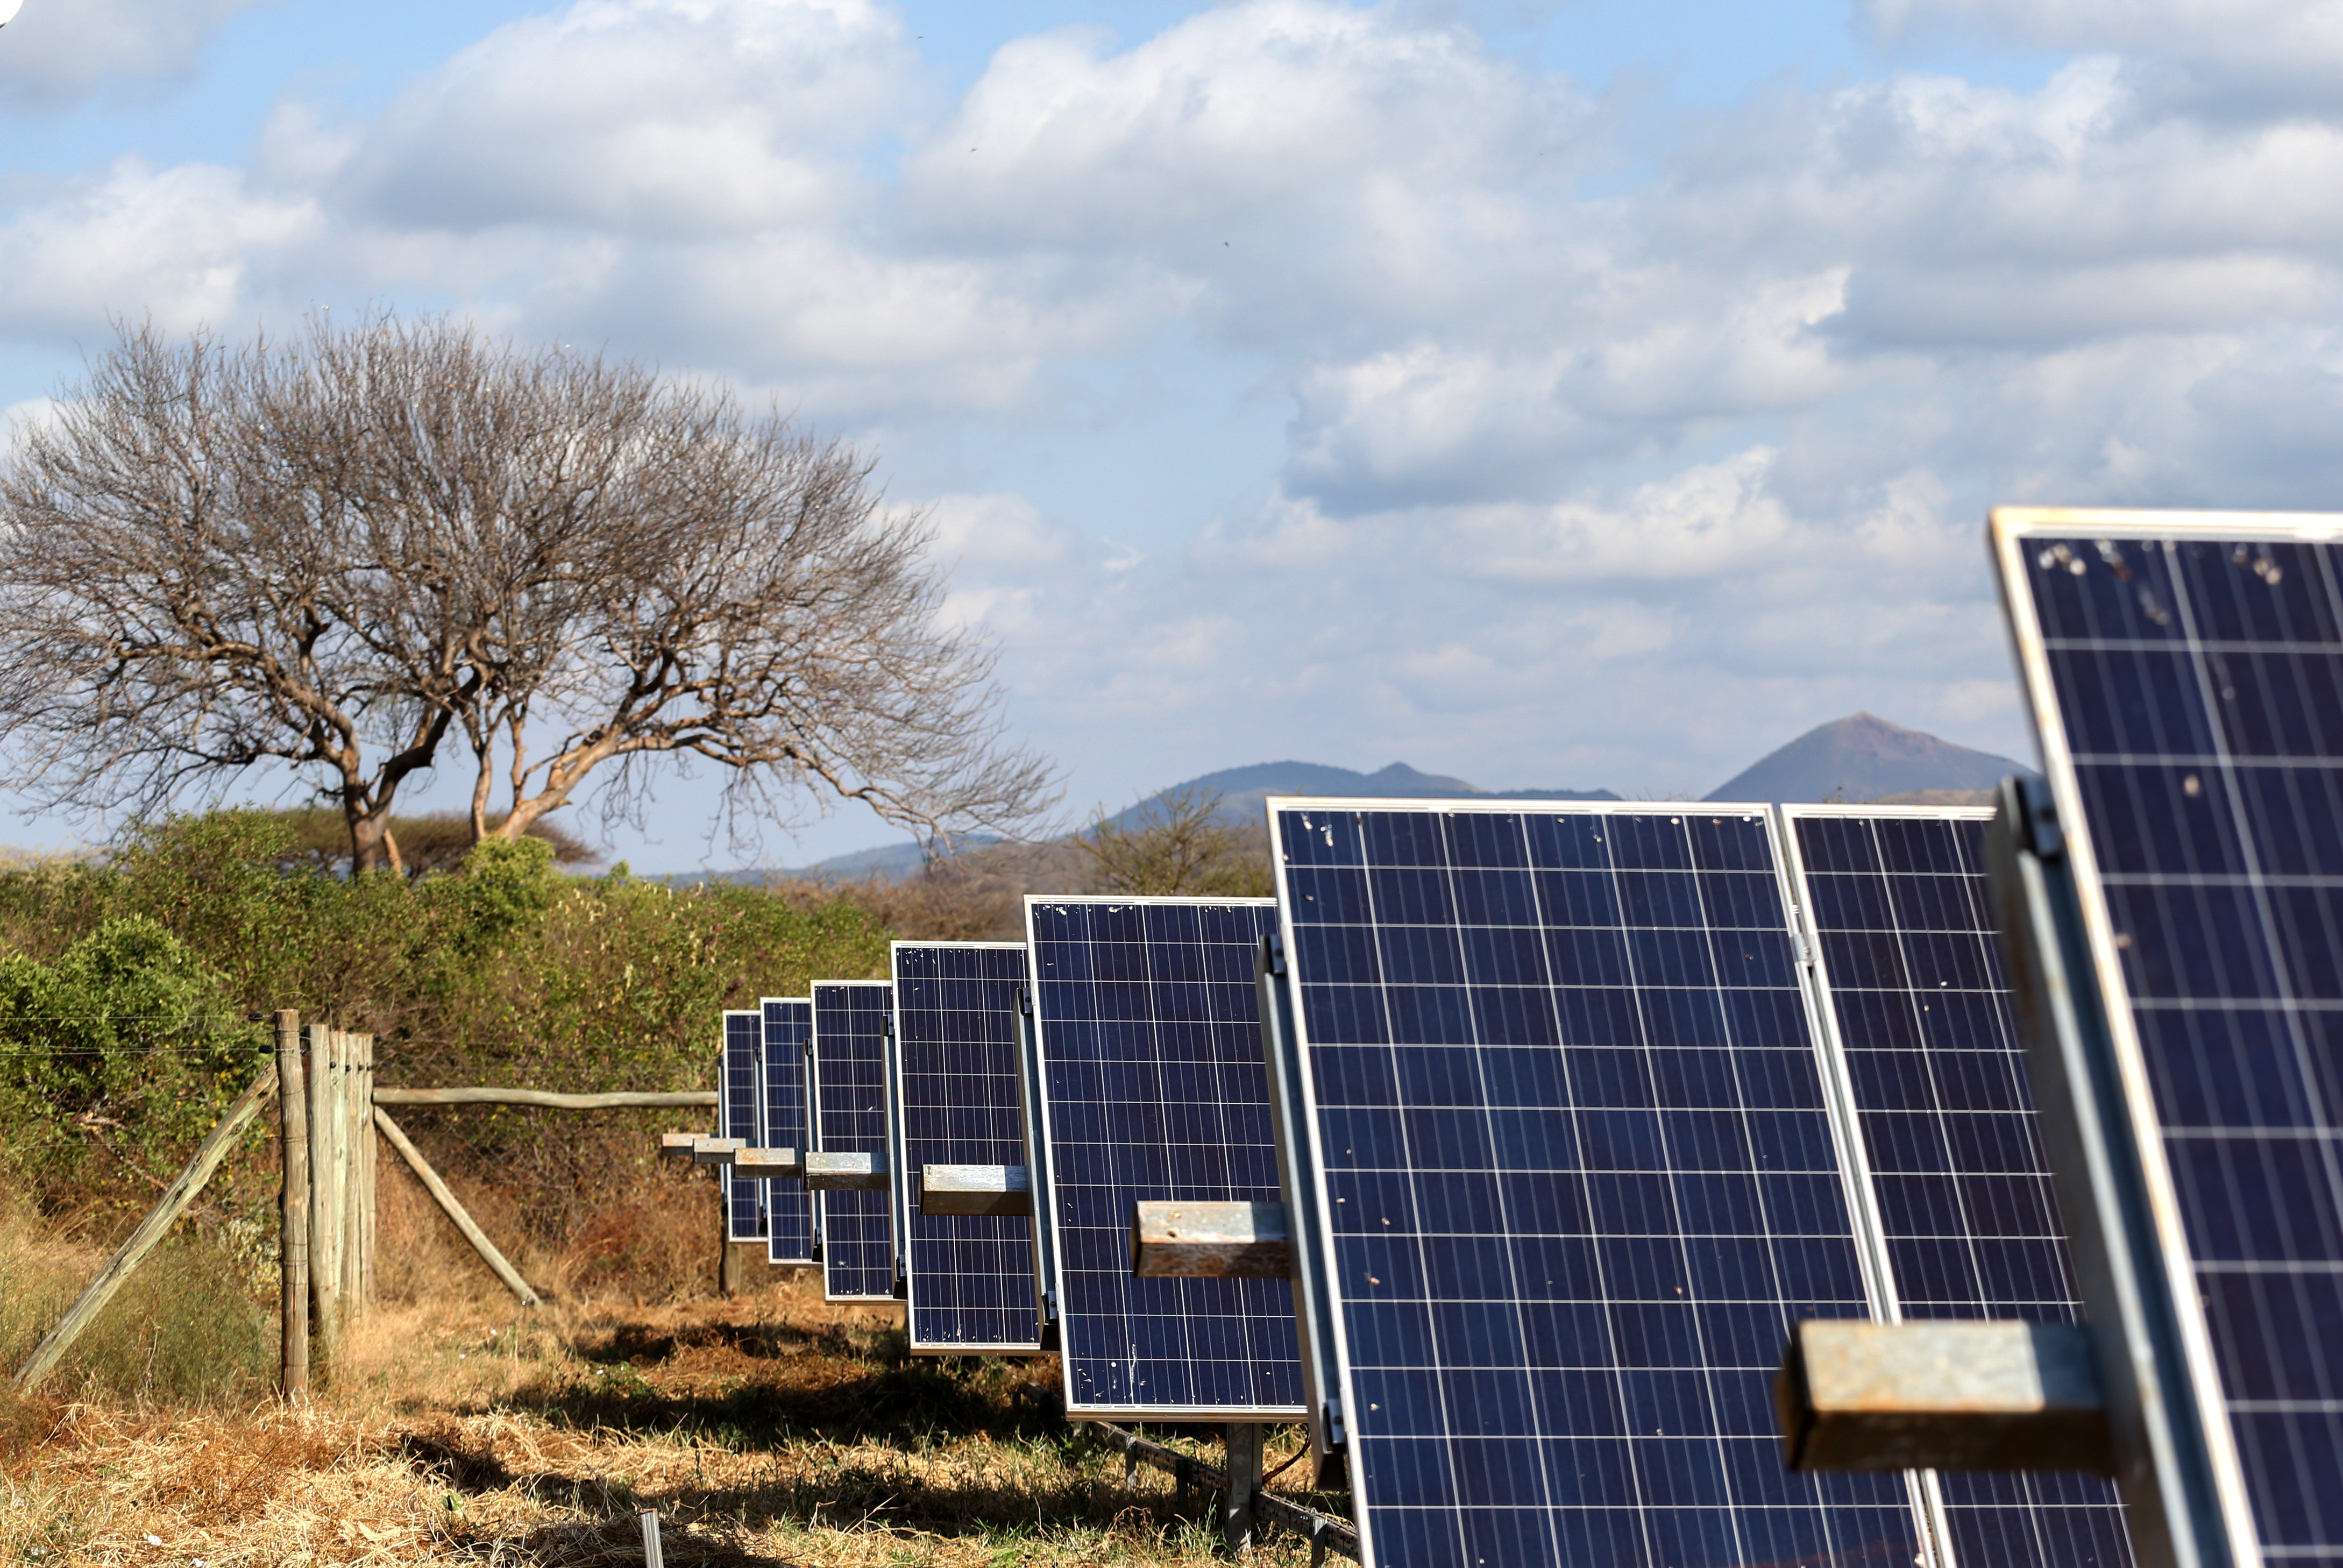 Energise Africa Announces Partnership To Provide Solar Panels To African Communities